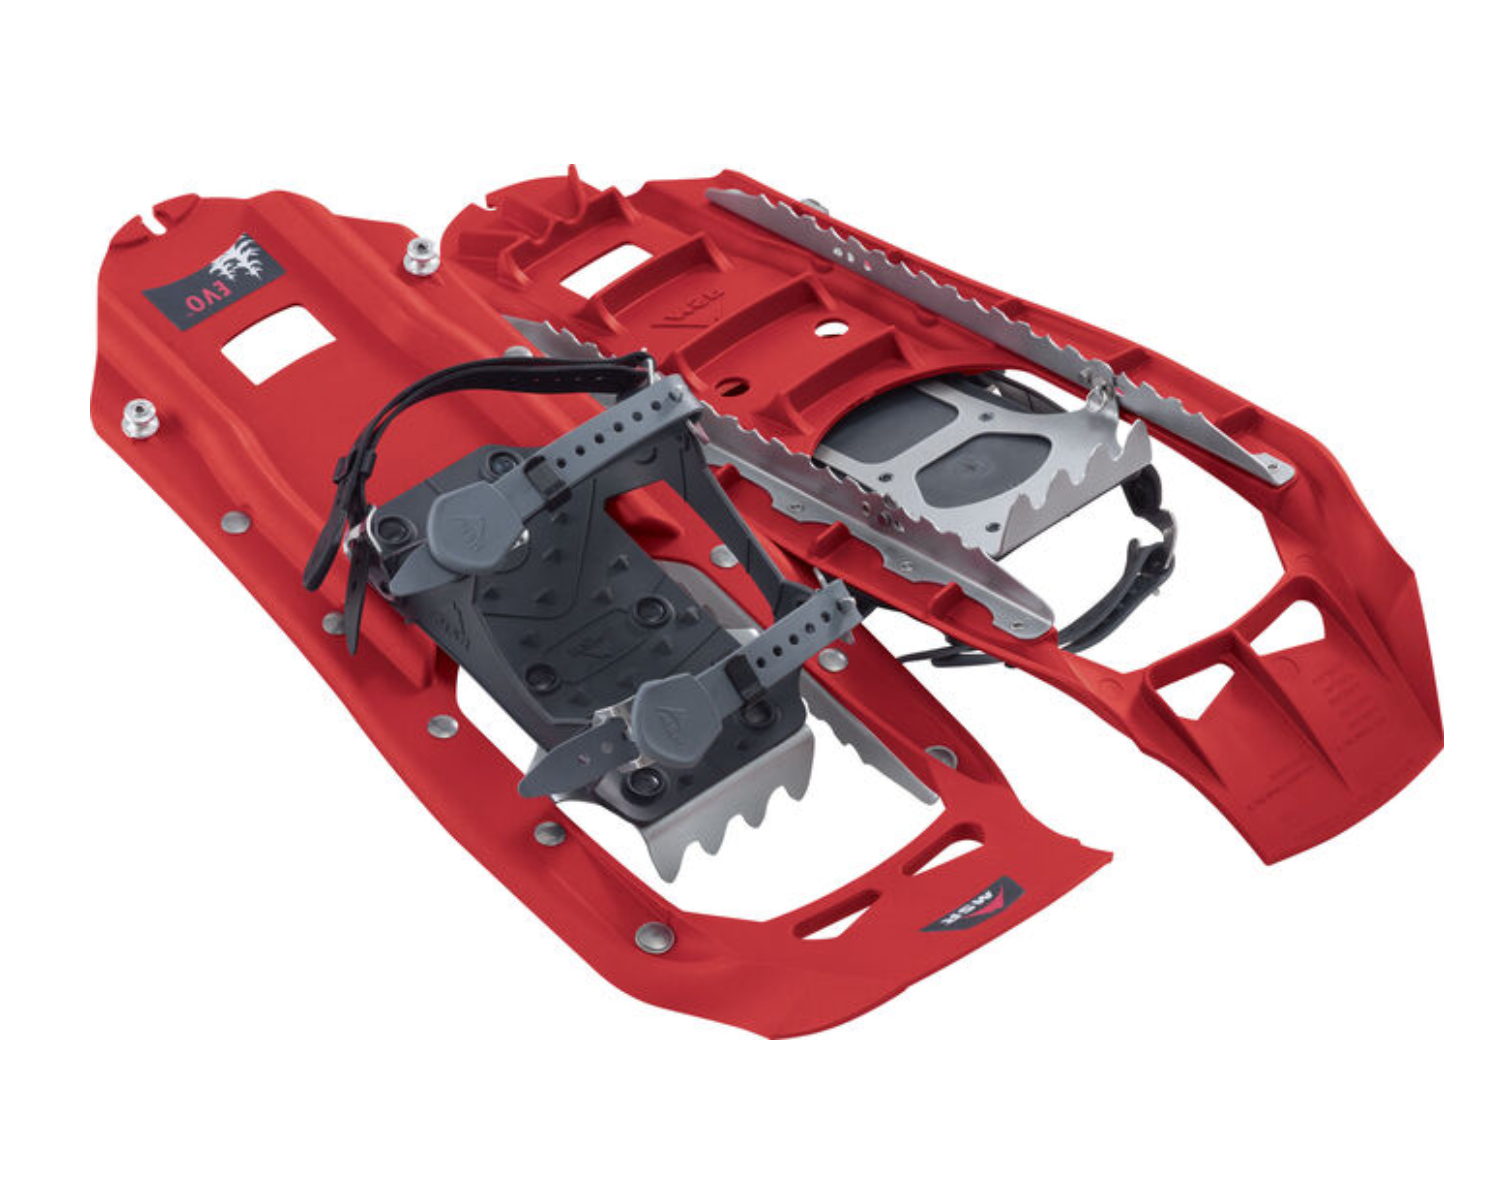 Rent these snowshoes from Packlist, and have it delivered and picked up.